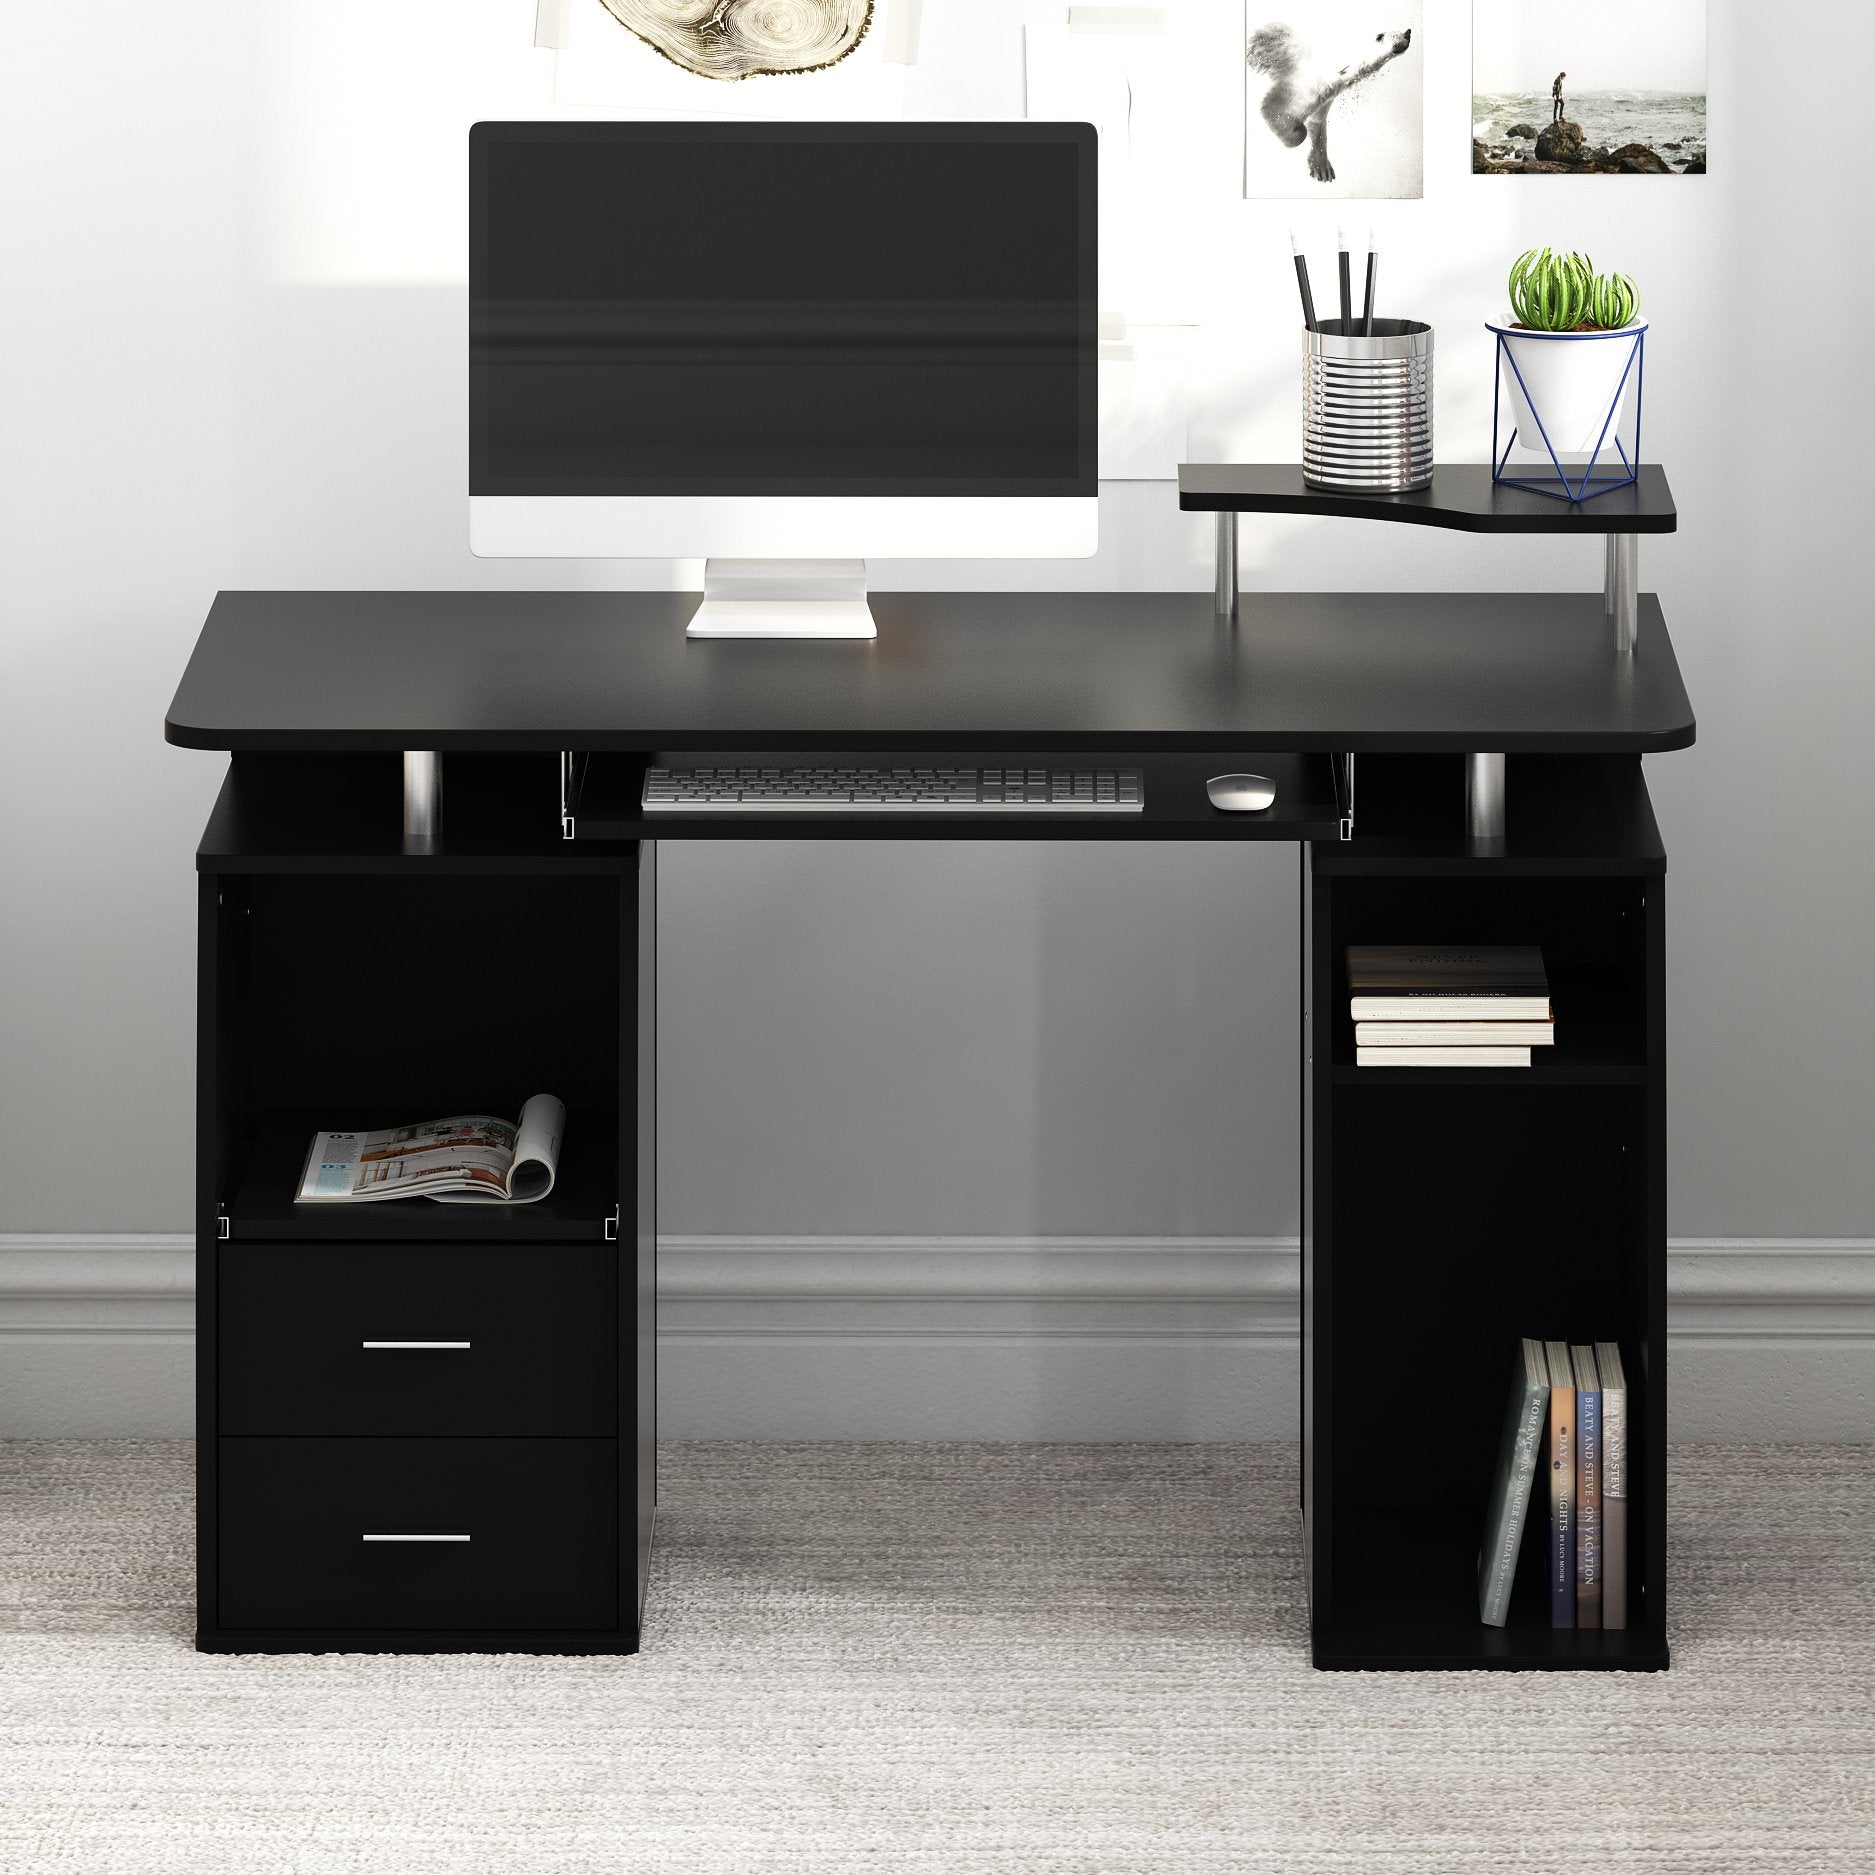 Computer Desk with Cupboard Drawers and Keyboard Tray, Black